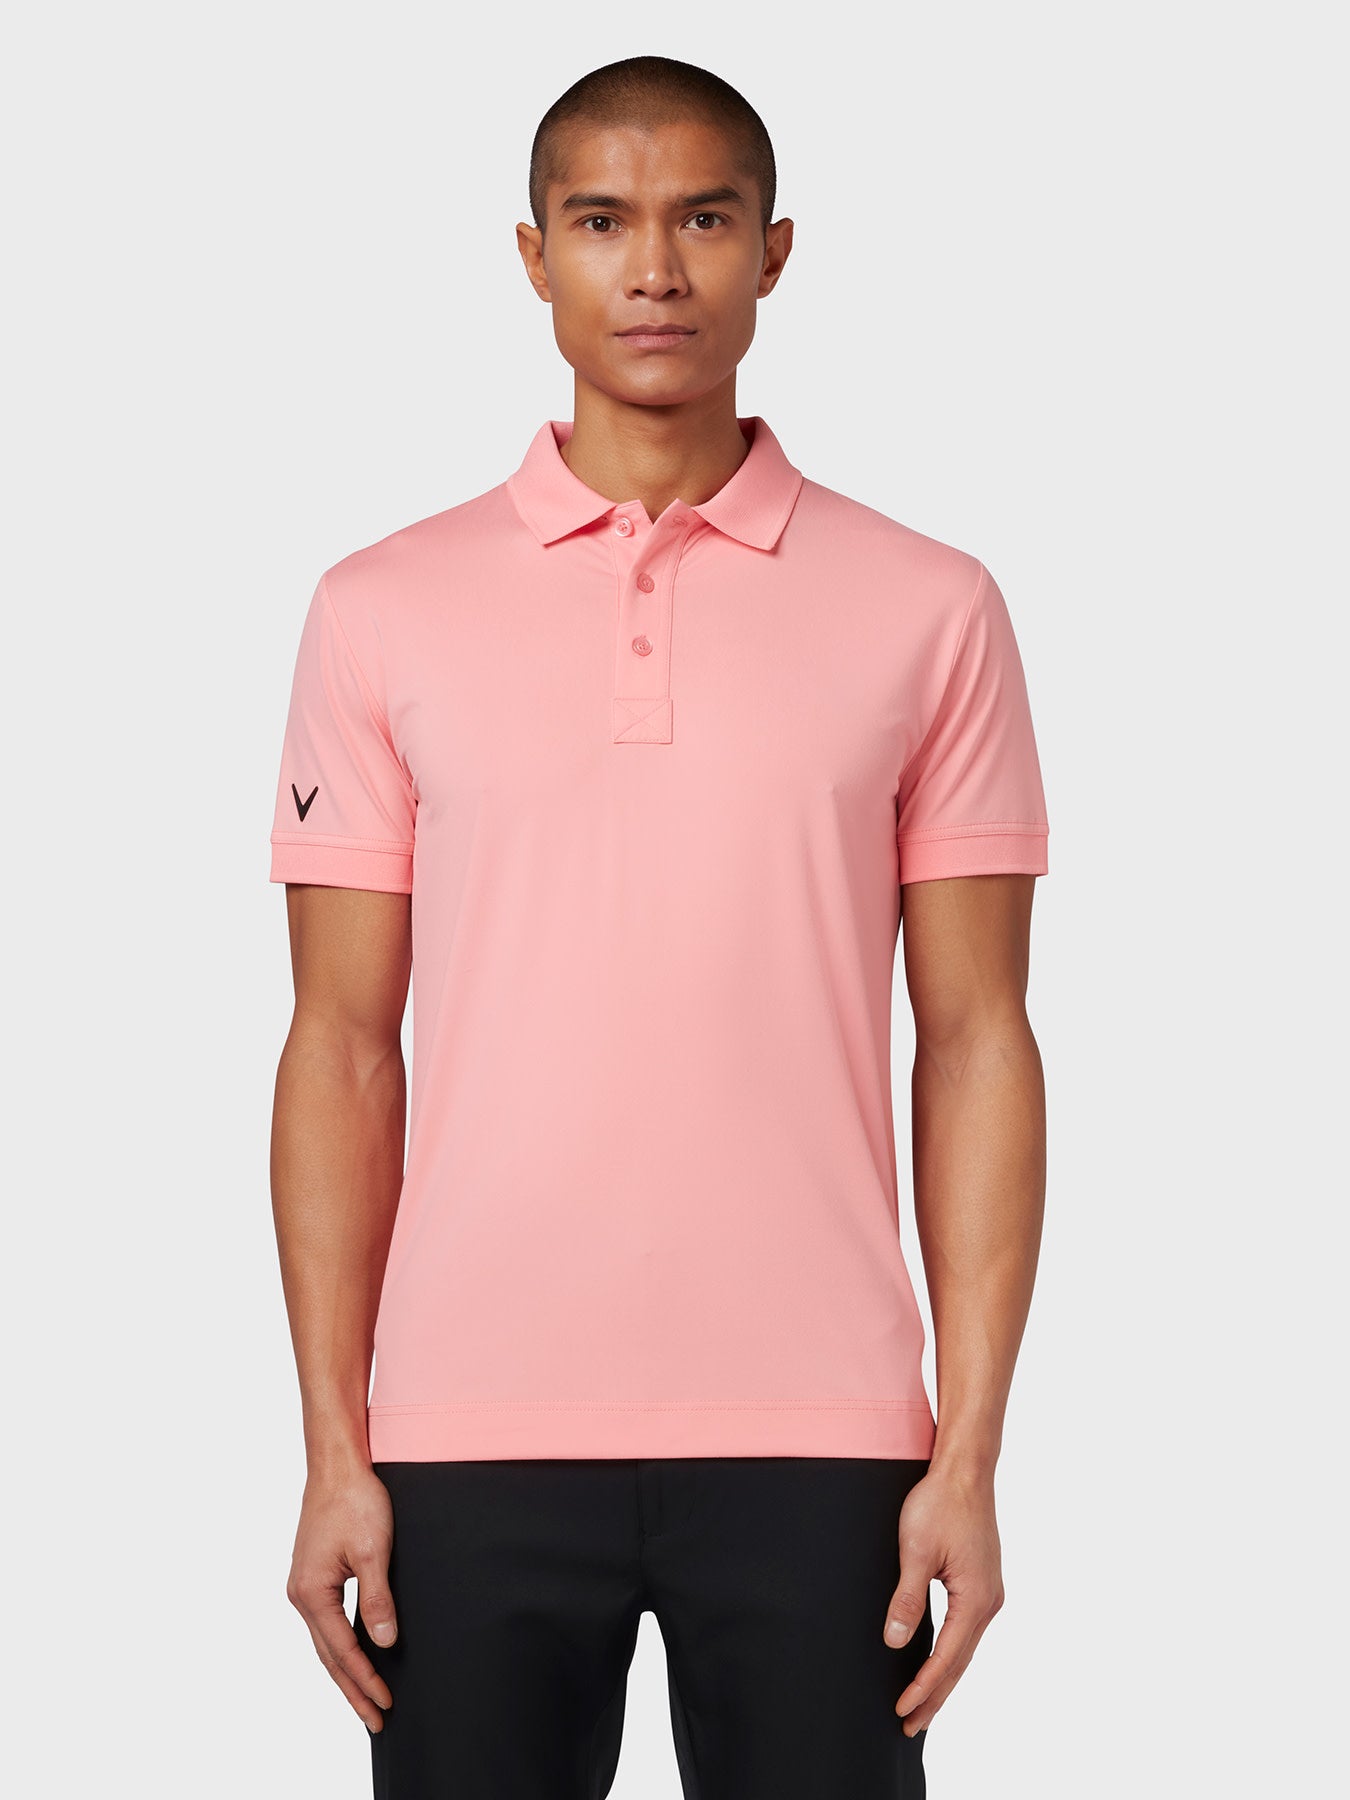 View X Series Solid Ribbed Polo In Geranium Pink Geranium Pink XL information